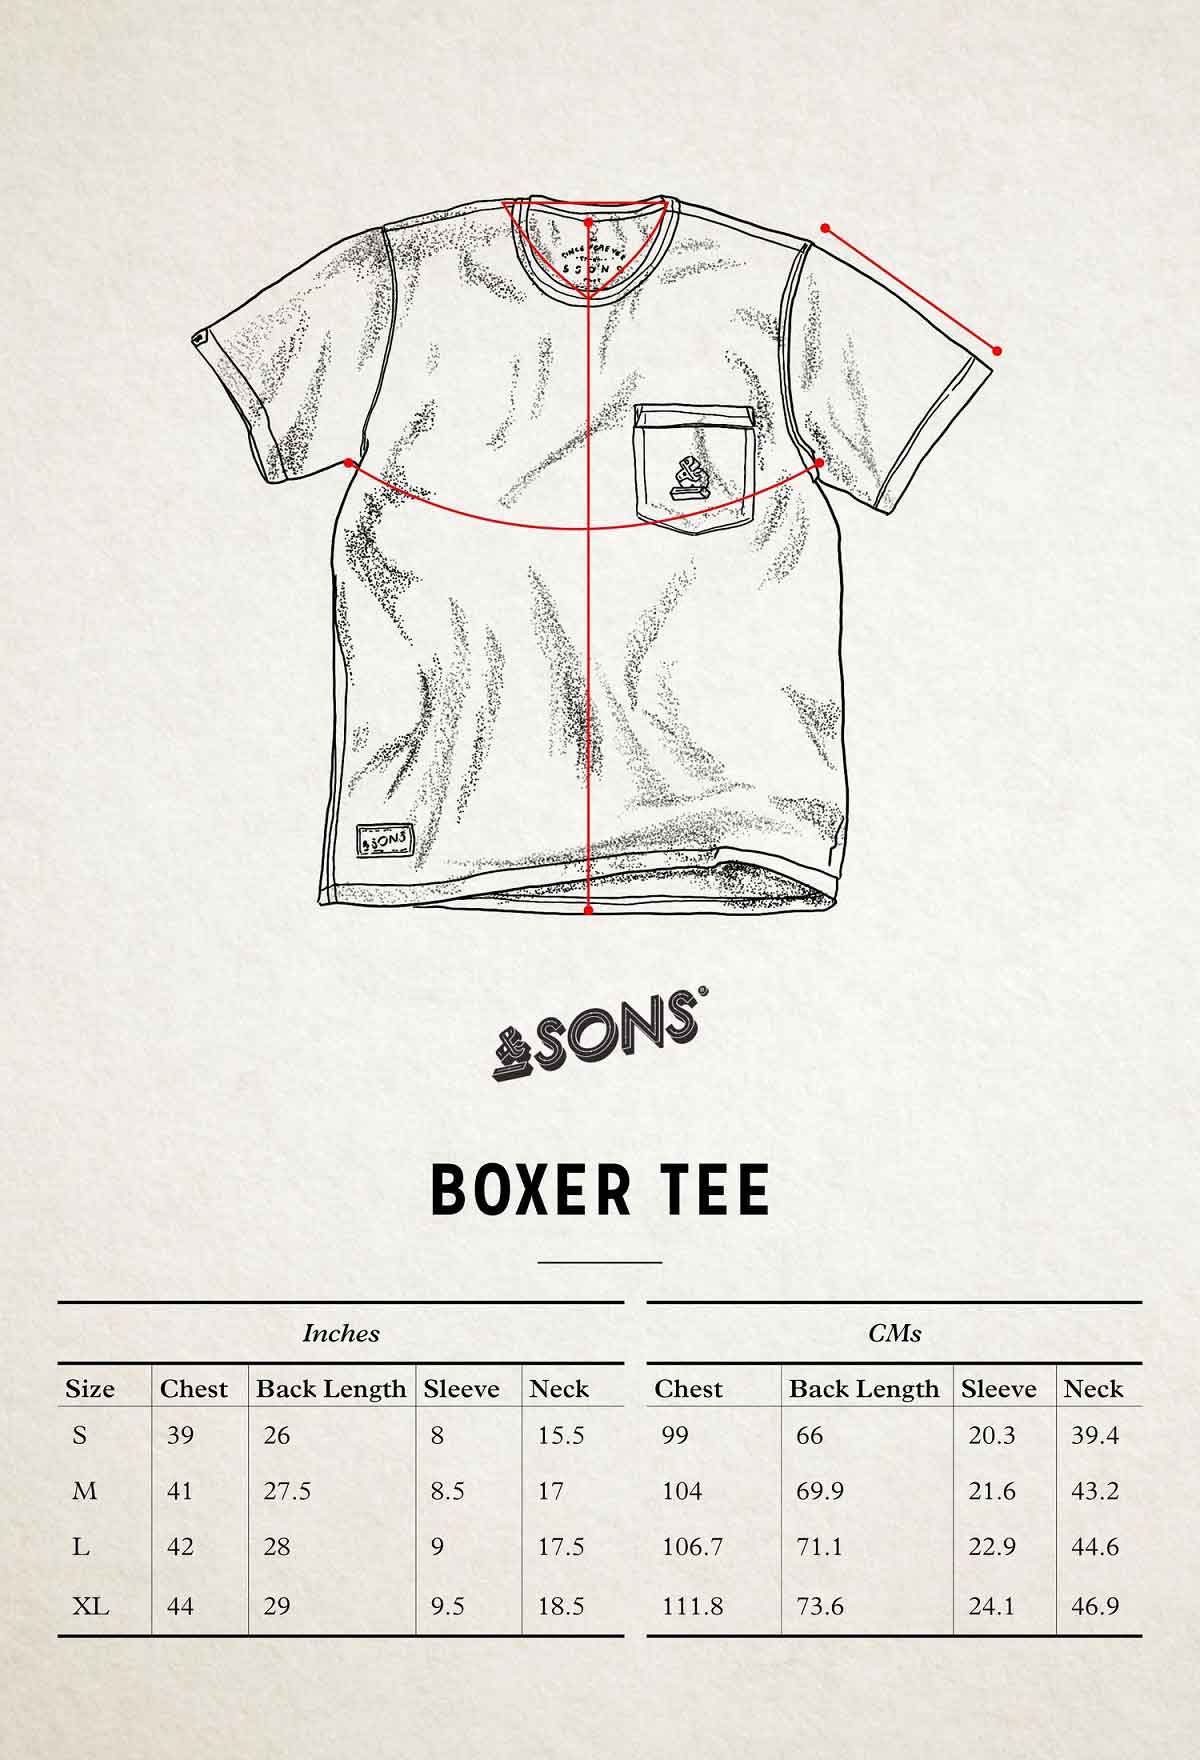 &SONS Boxer T-shirt size guide